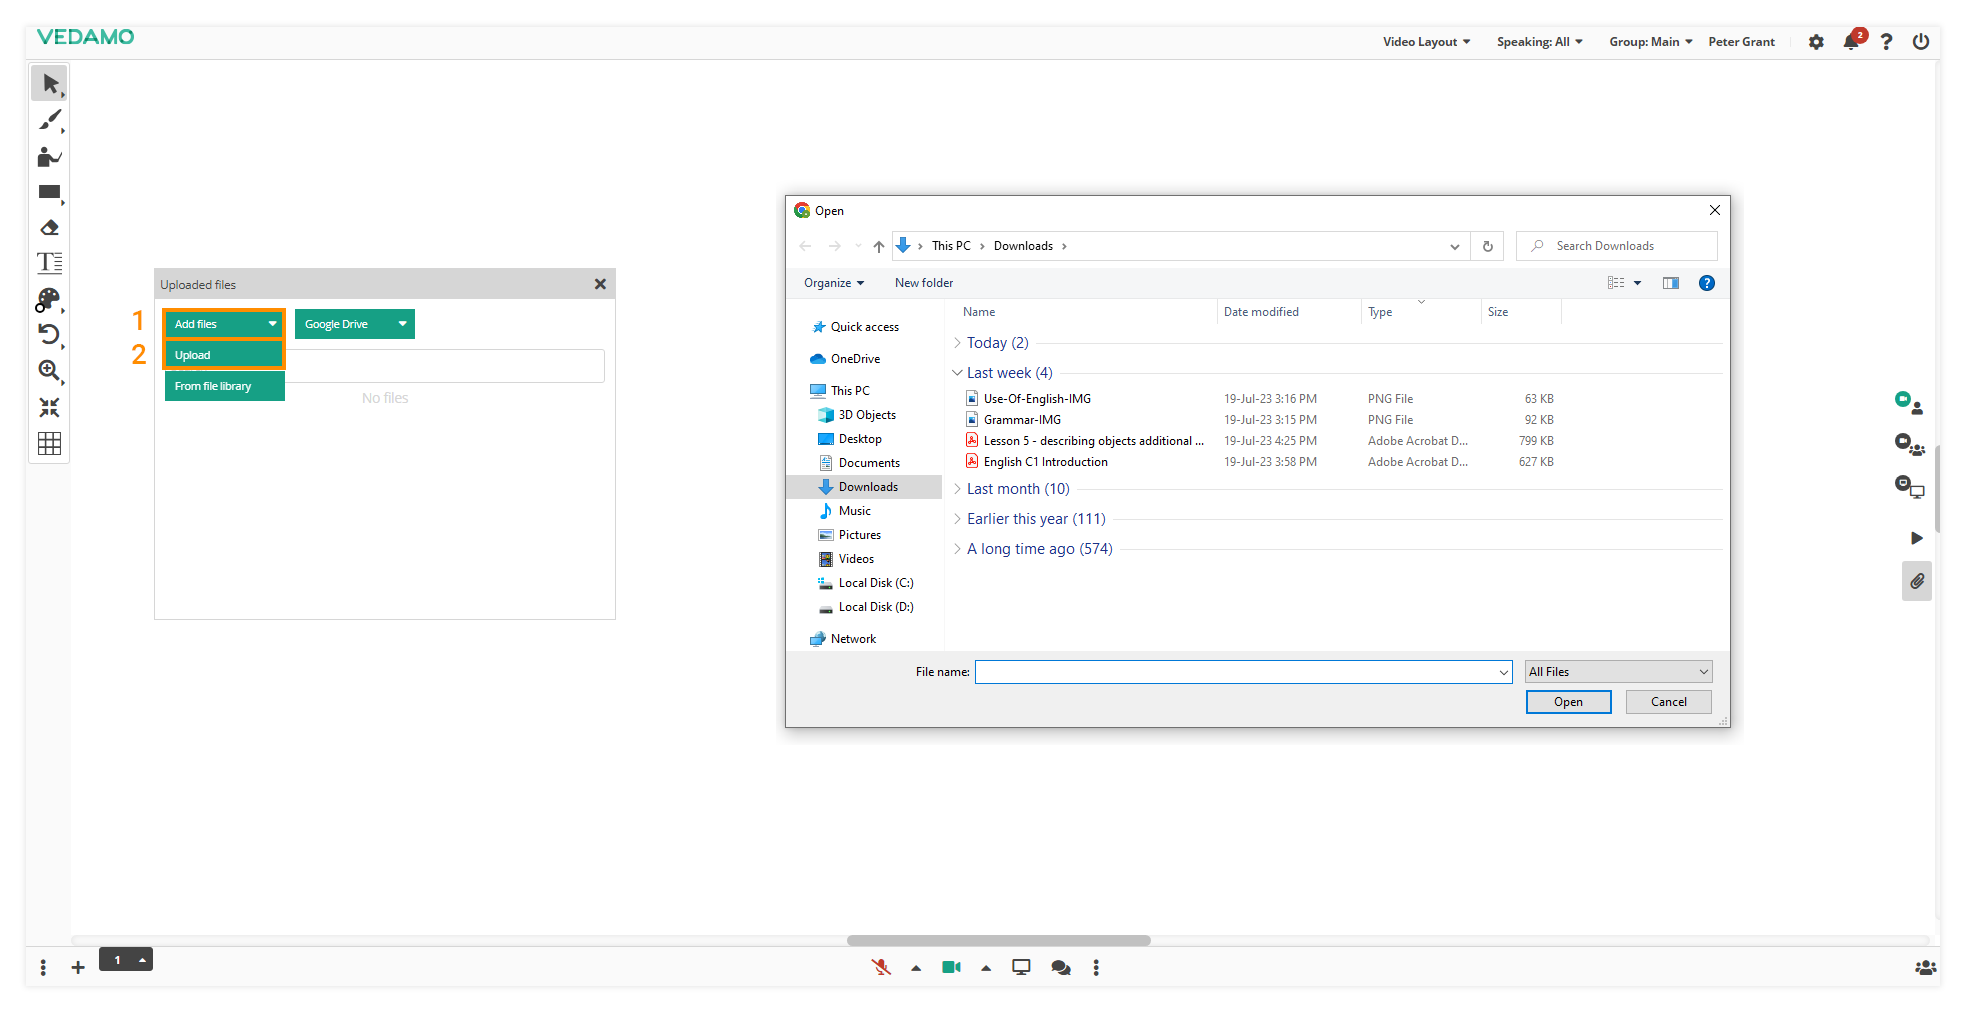 Virtual Classroom File Library: Files will also be stored in the File library